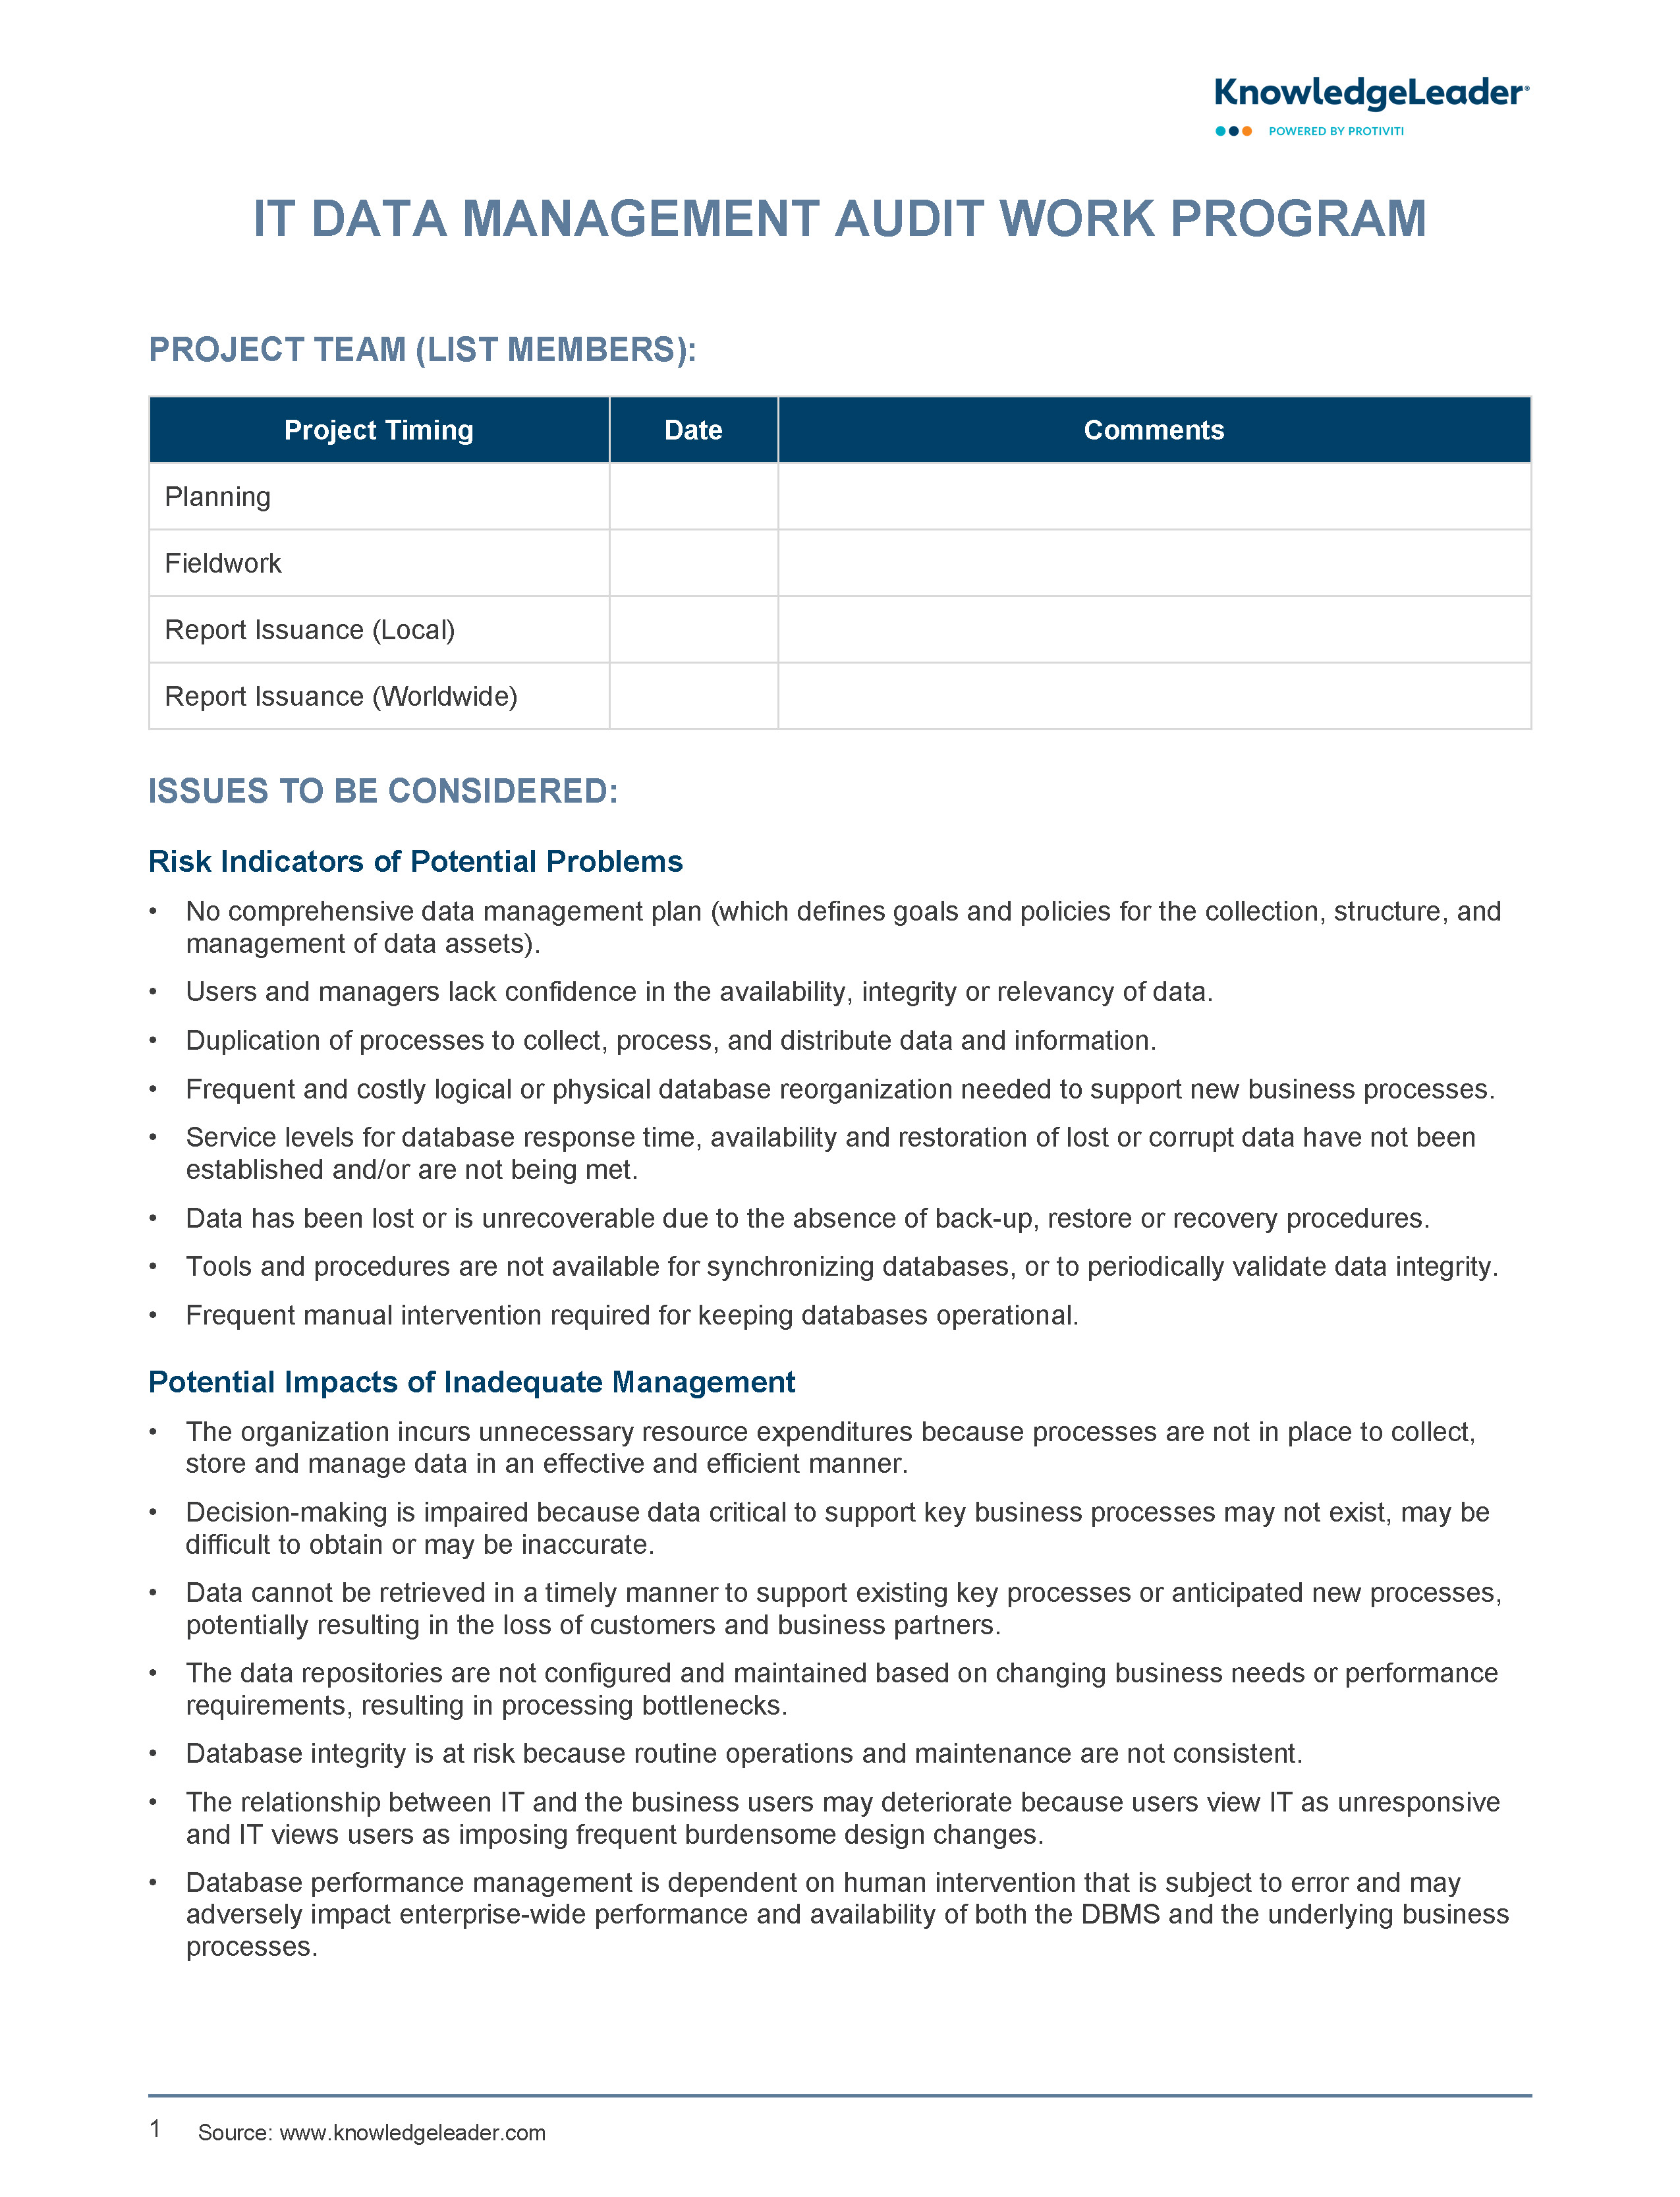 Screenshot of the first page of IT Data Management Audit Work Program